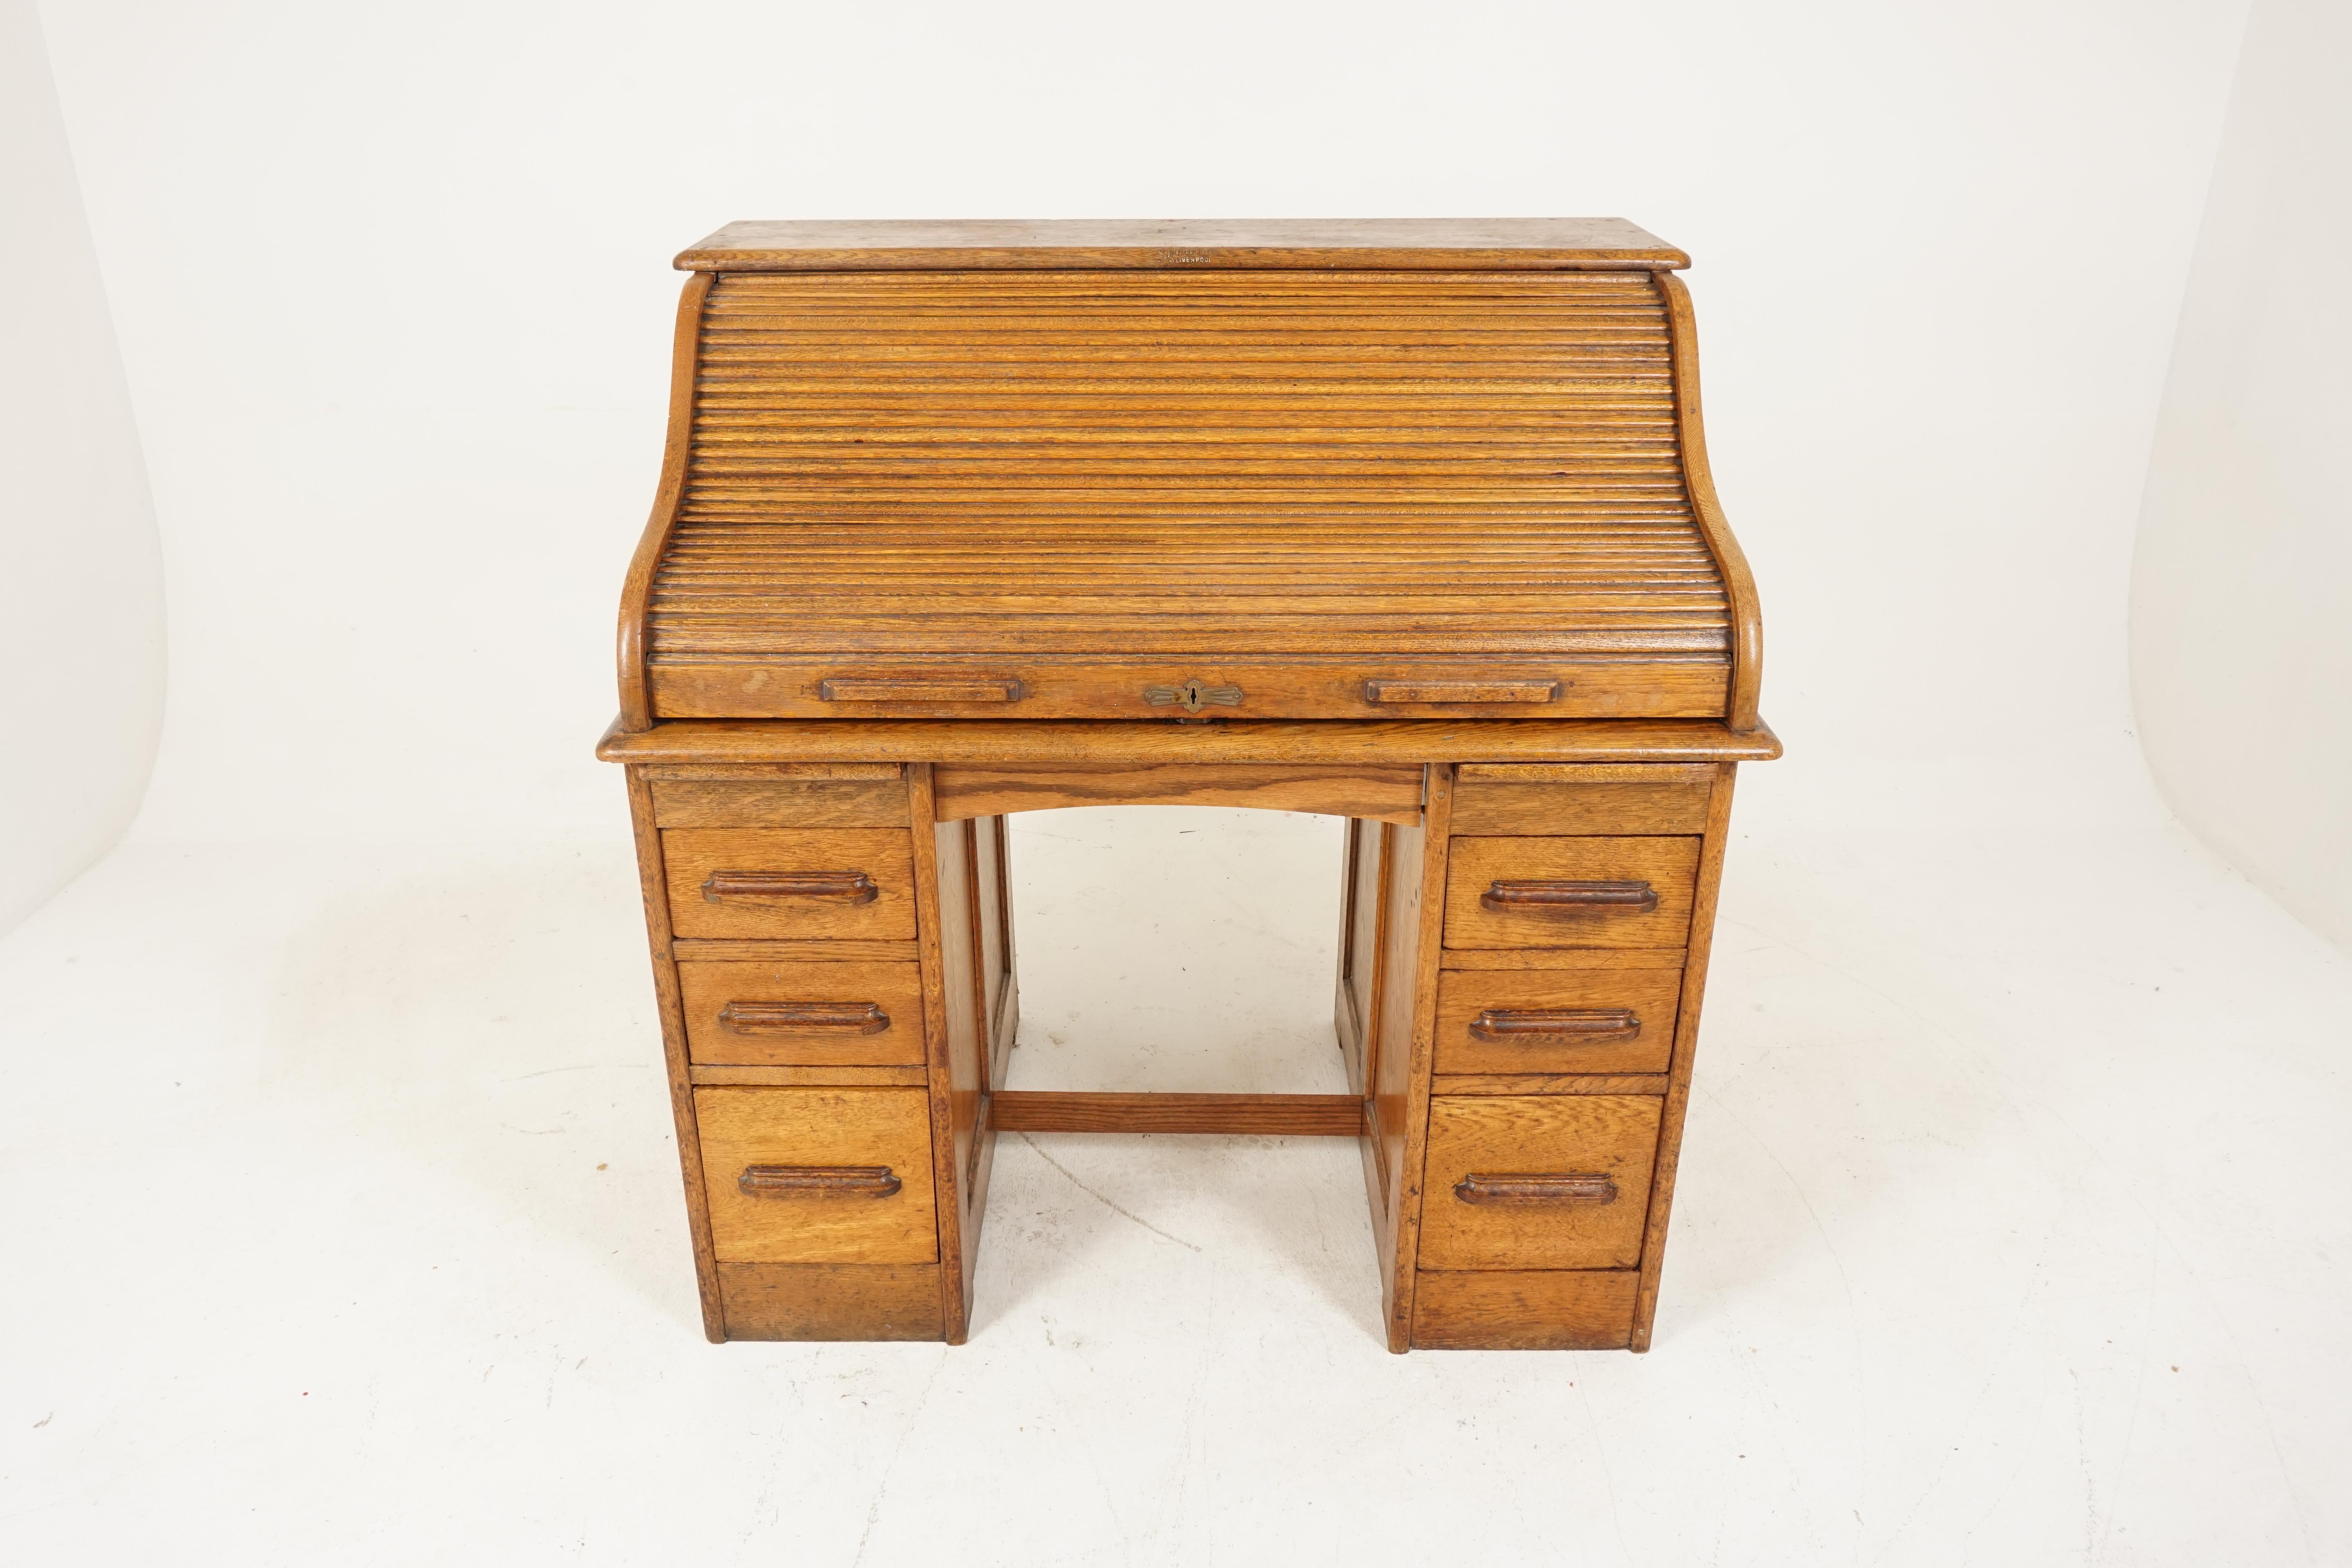 Antique oak roll top desk, Double Pedestal, American 1910, B2801

American 1910
Solid oak
Original finish
Rectangular moulded top
Good working tambour roll
Opens to reveal writing surface
Pair of drawers
Slide out pen holder with pigeon